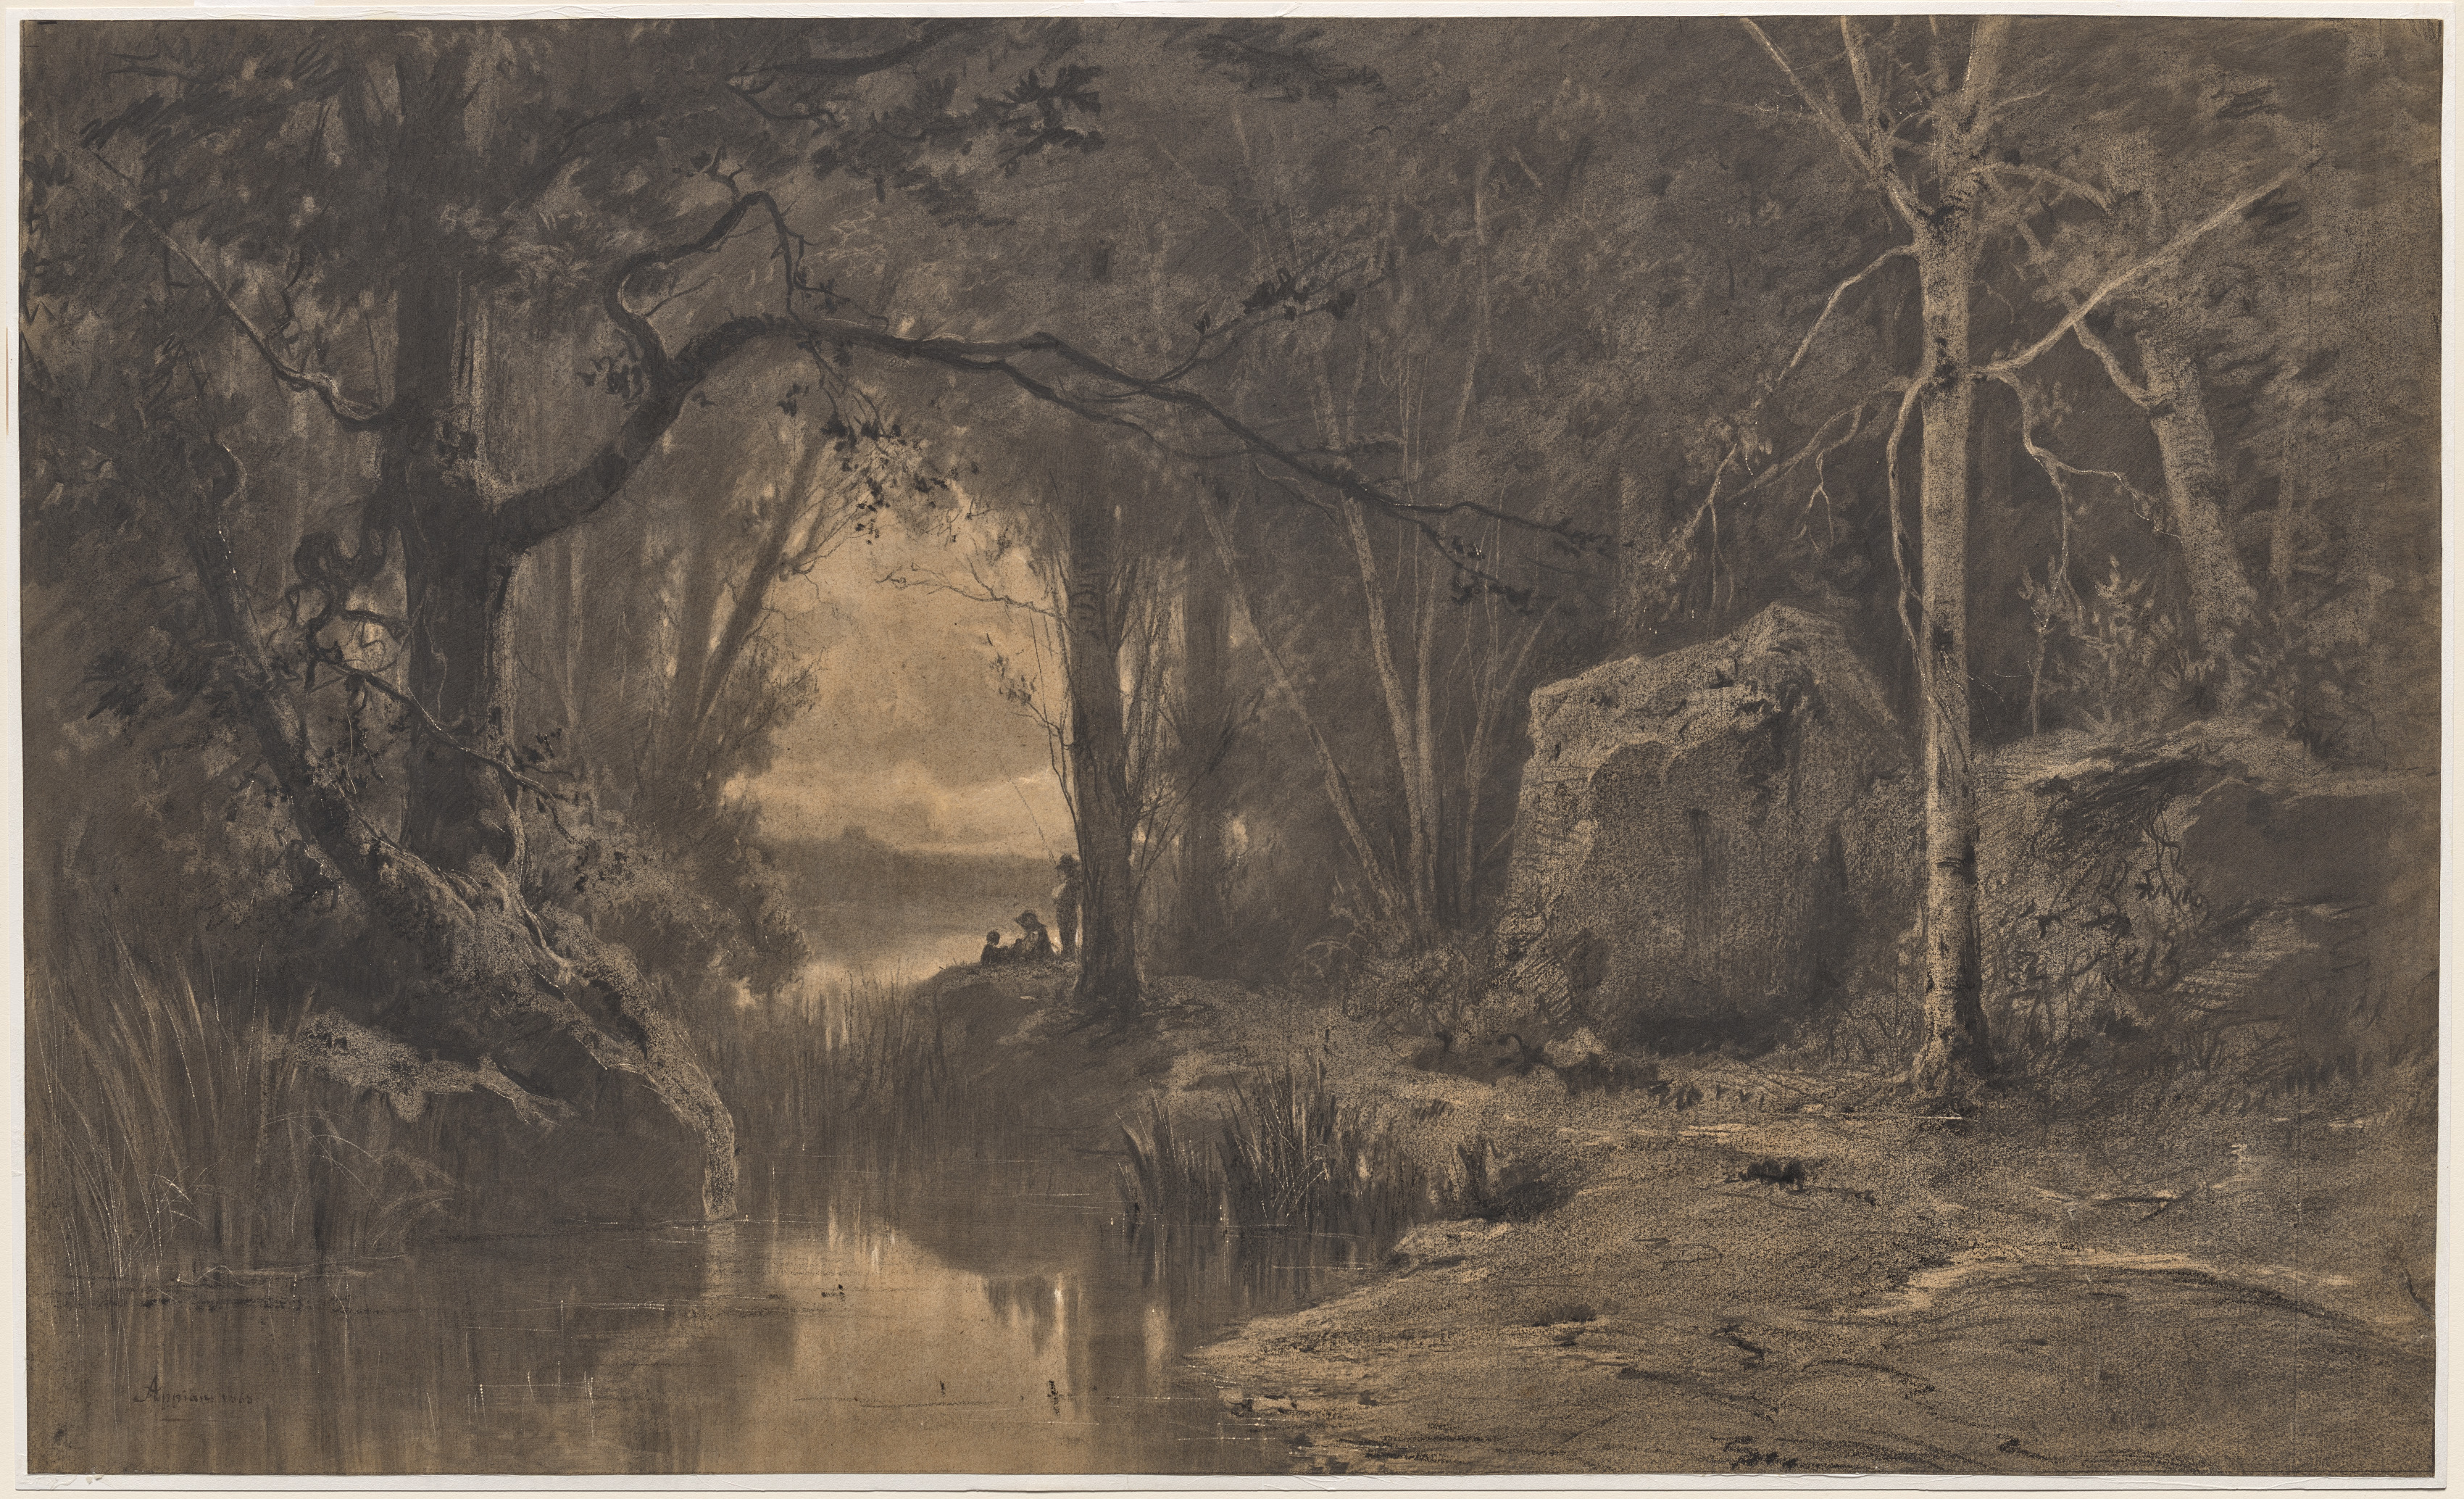 Three Fishermen Along the Banks of a River at the Edge of a Forest